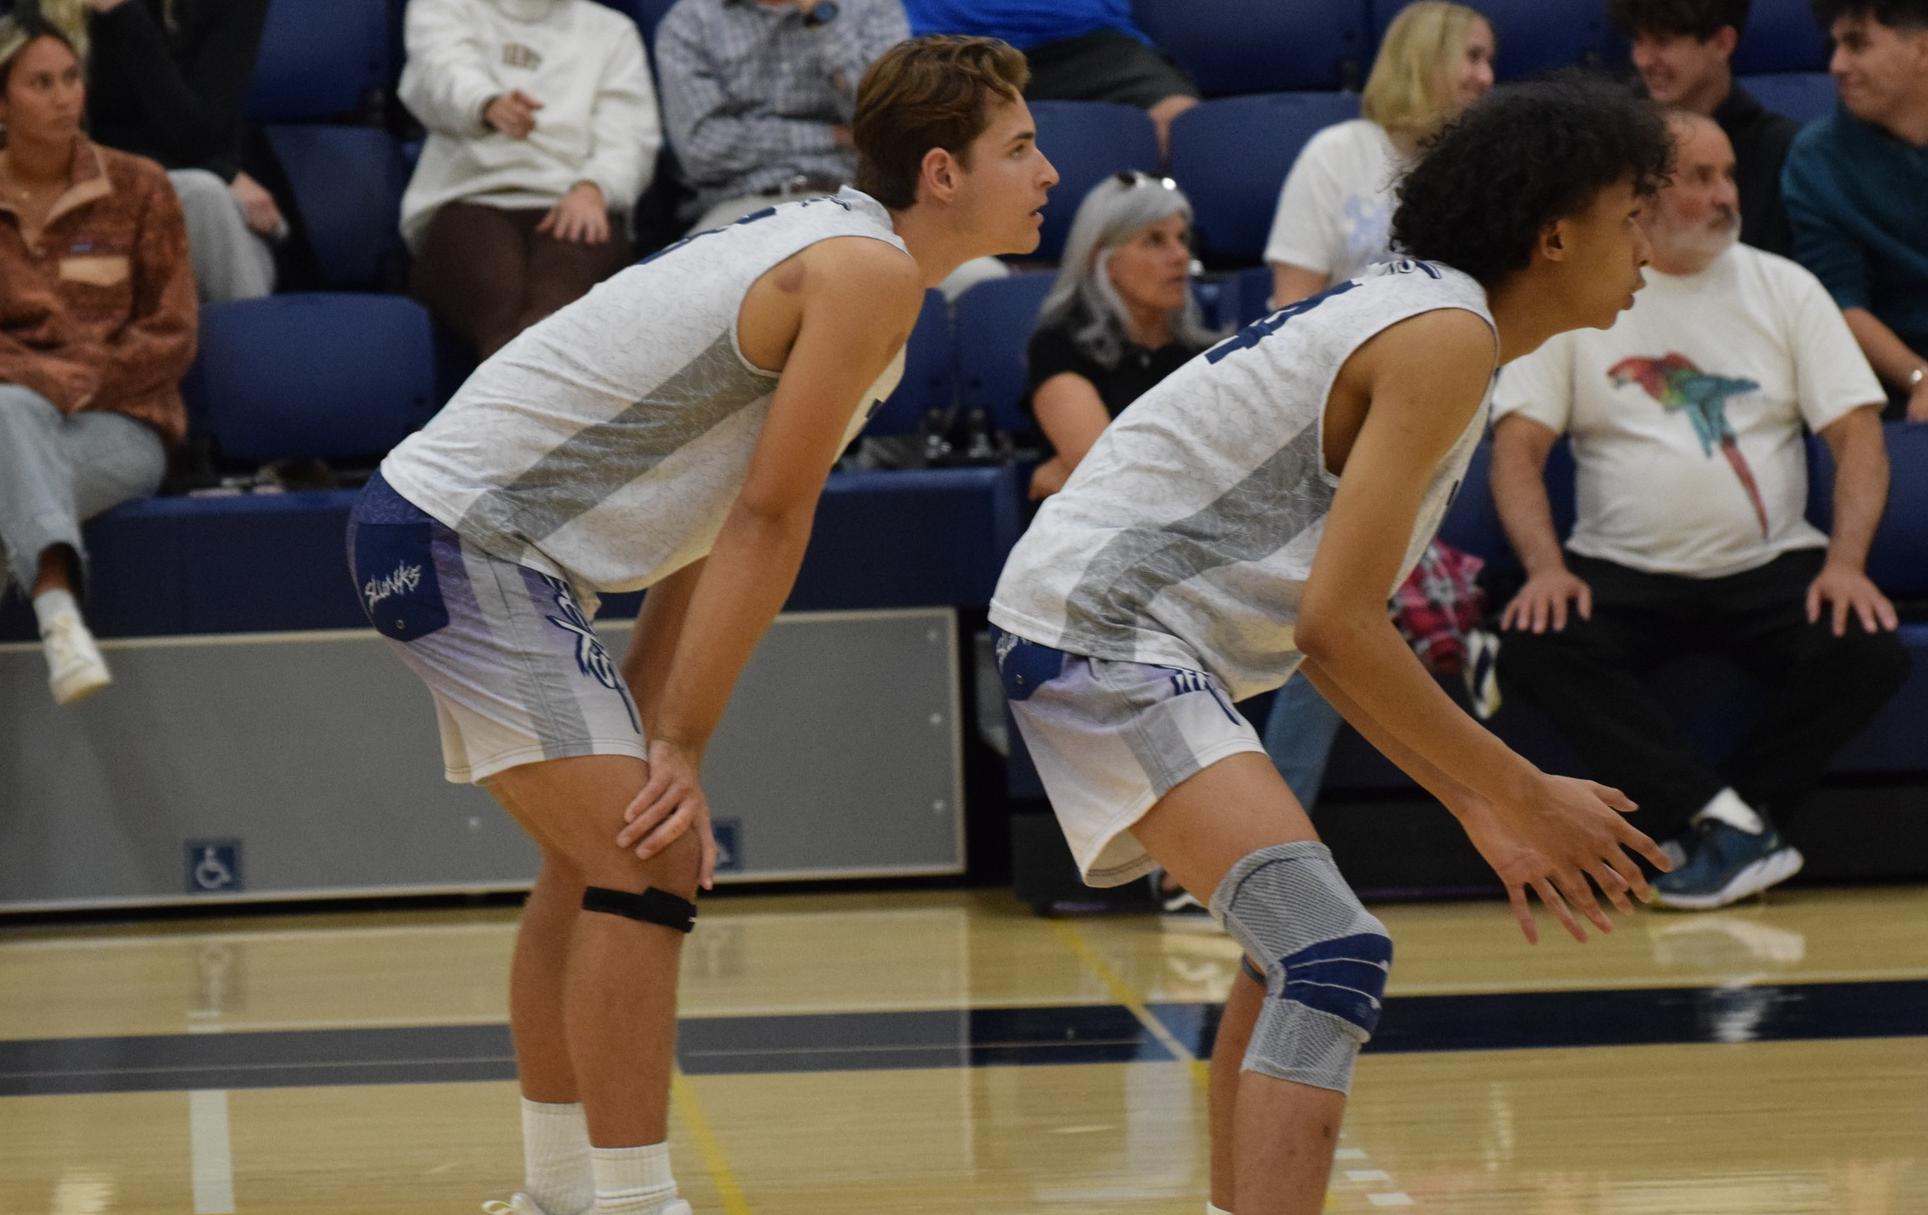 Men's volleyball team ranked No. 4 in the latest state poll